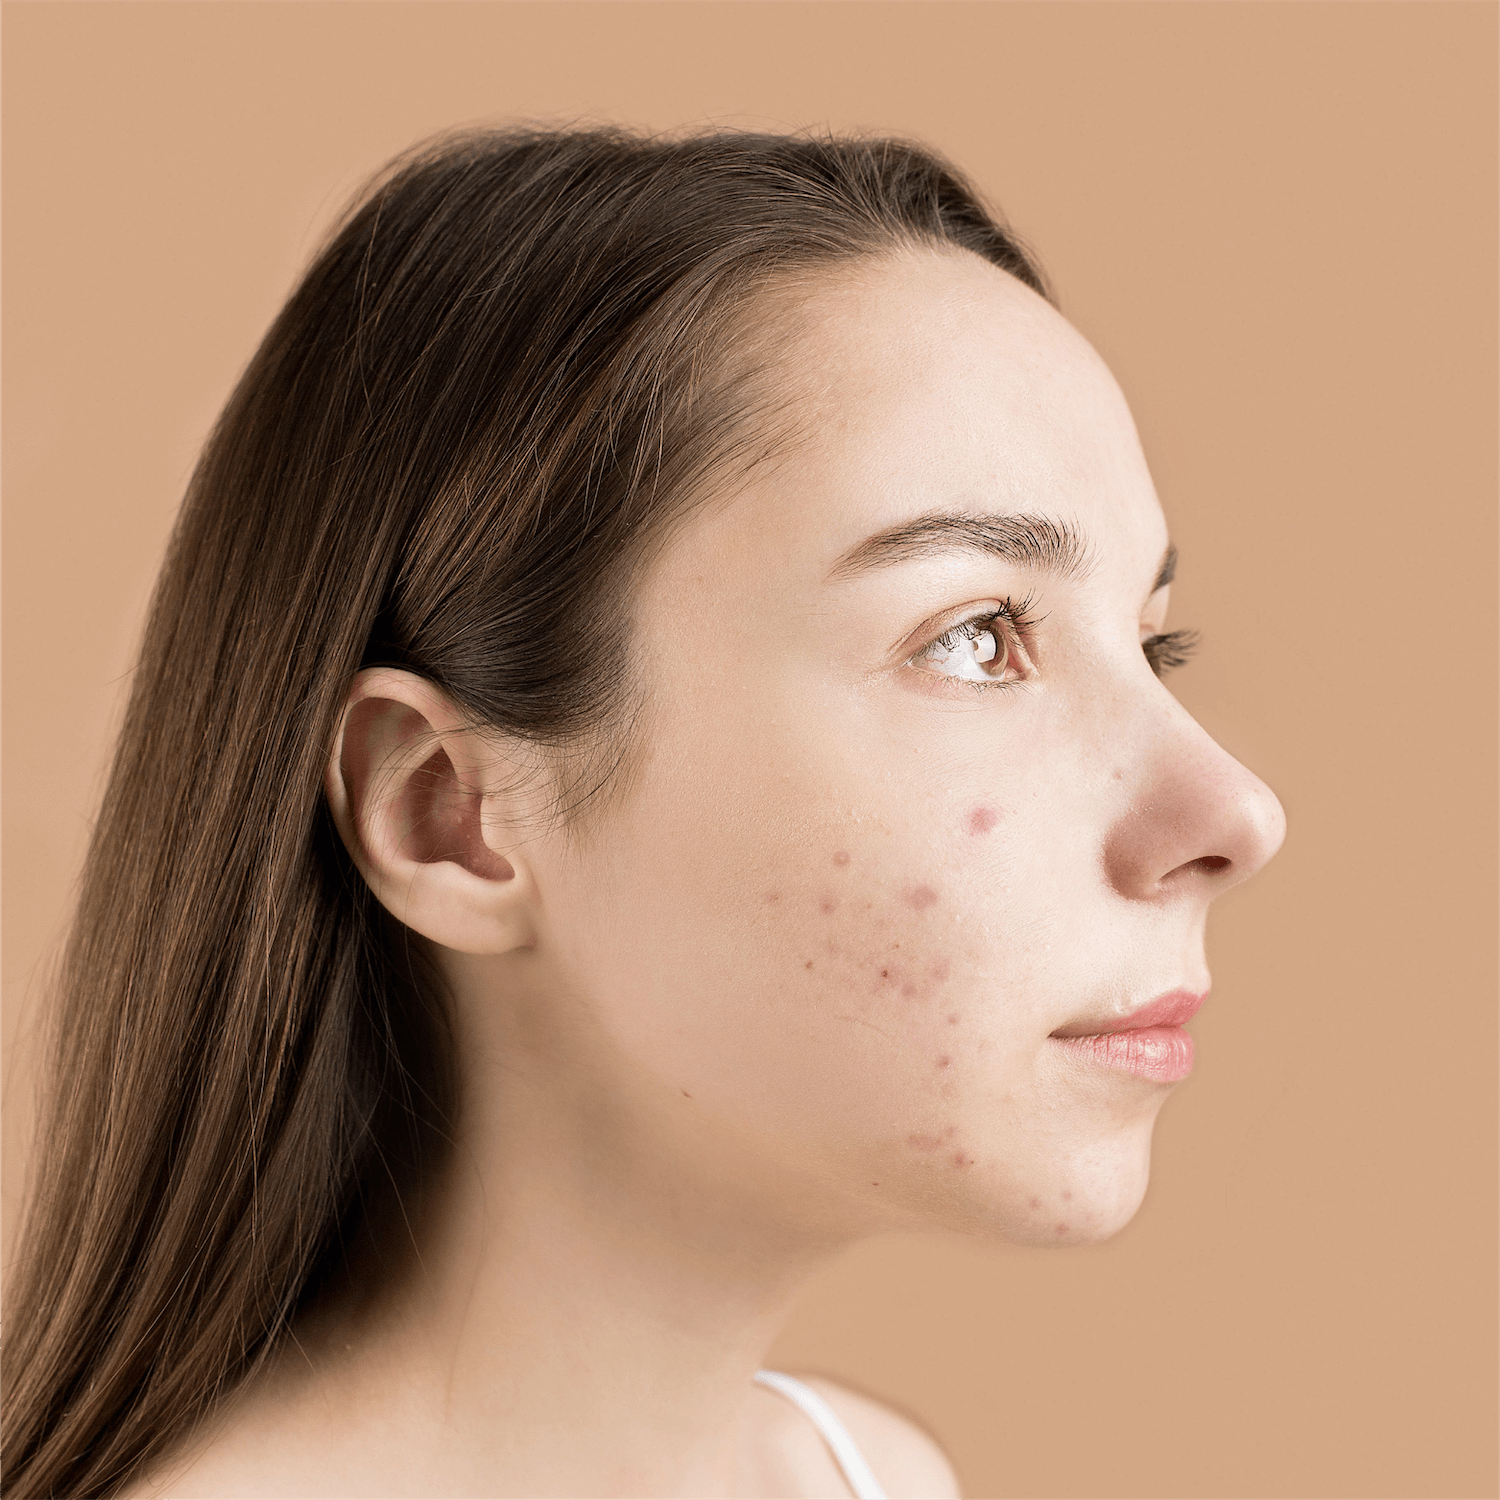 Acne Scars 101: How to Reduce Pimple Marks?